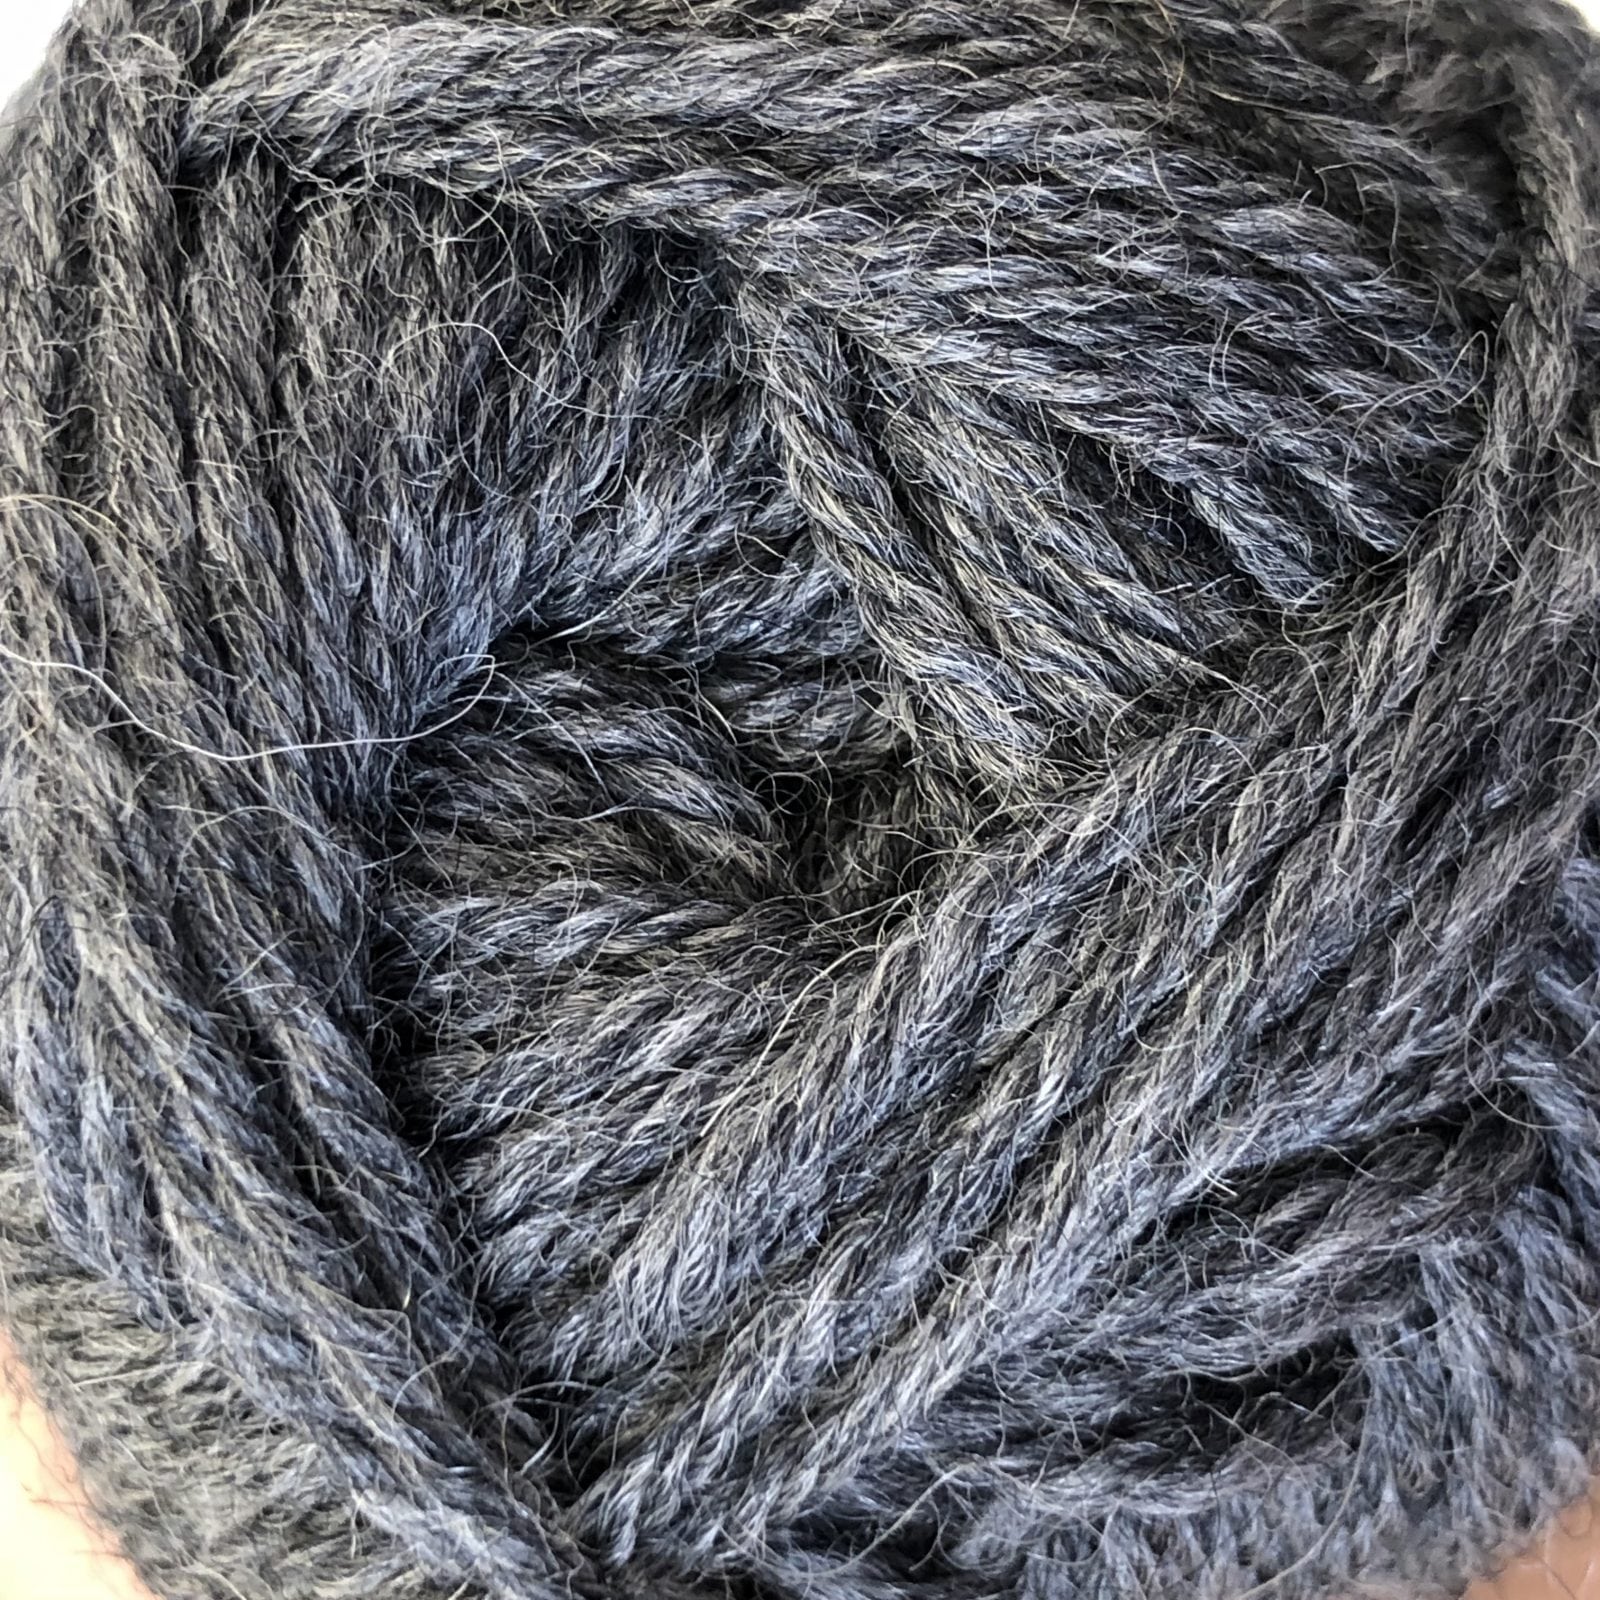 Countrywide Windsor 100% New Zealand wool yarn 8ply 8 ply double knit dk Marled Grey Shade 70